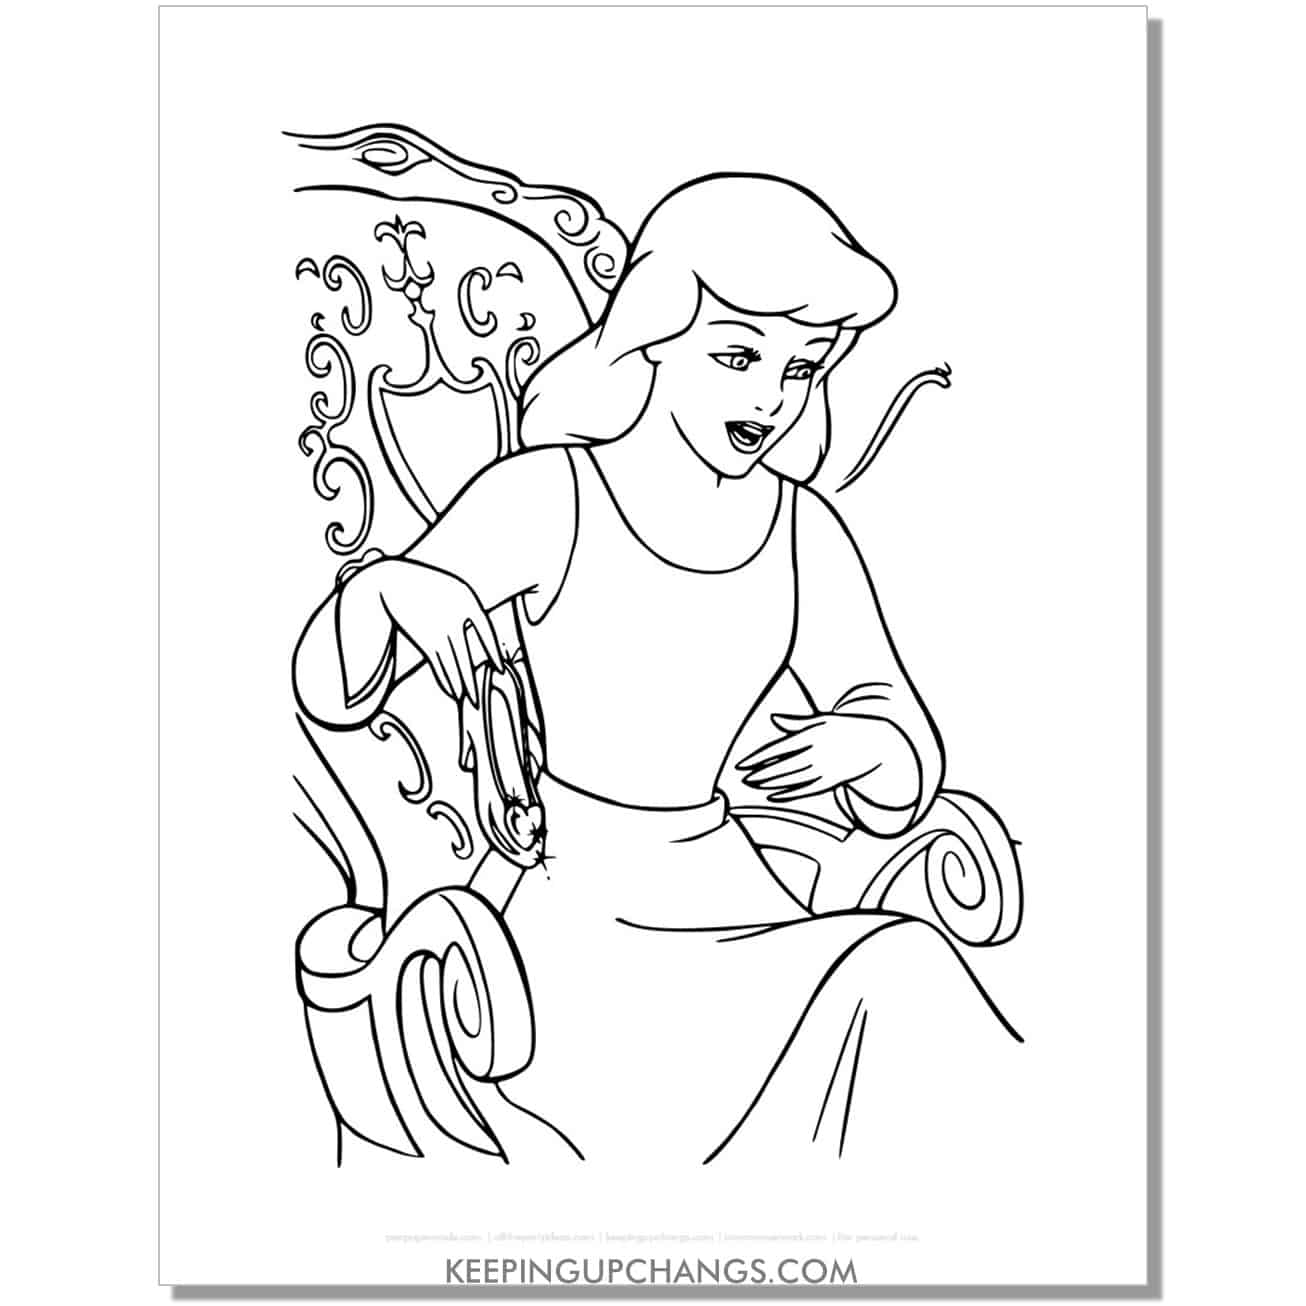 cinderella holding glass slipper coloring page, sheet.